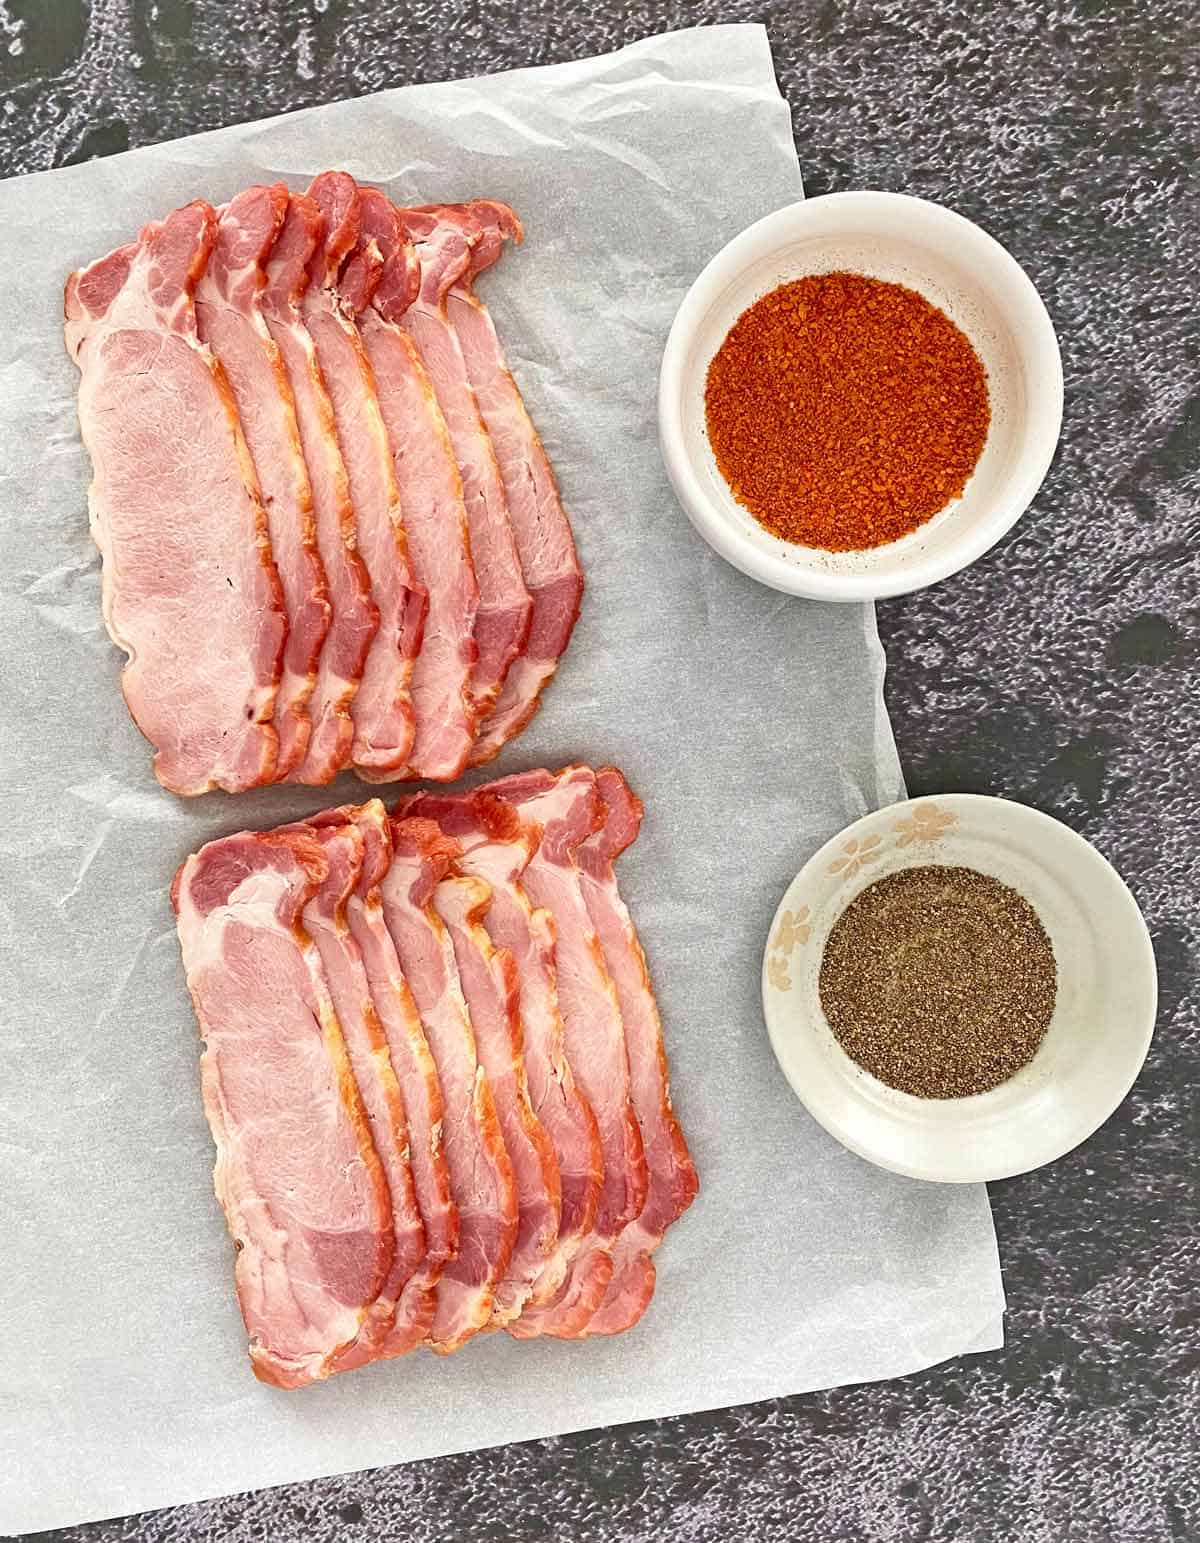 15 slices of back bacon, a small dish of freshly ground black pepper and pork spice rub seasoning.